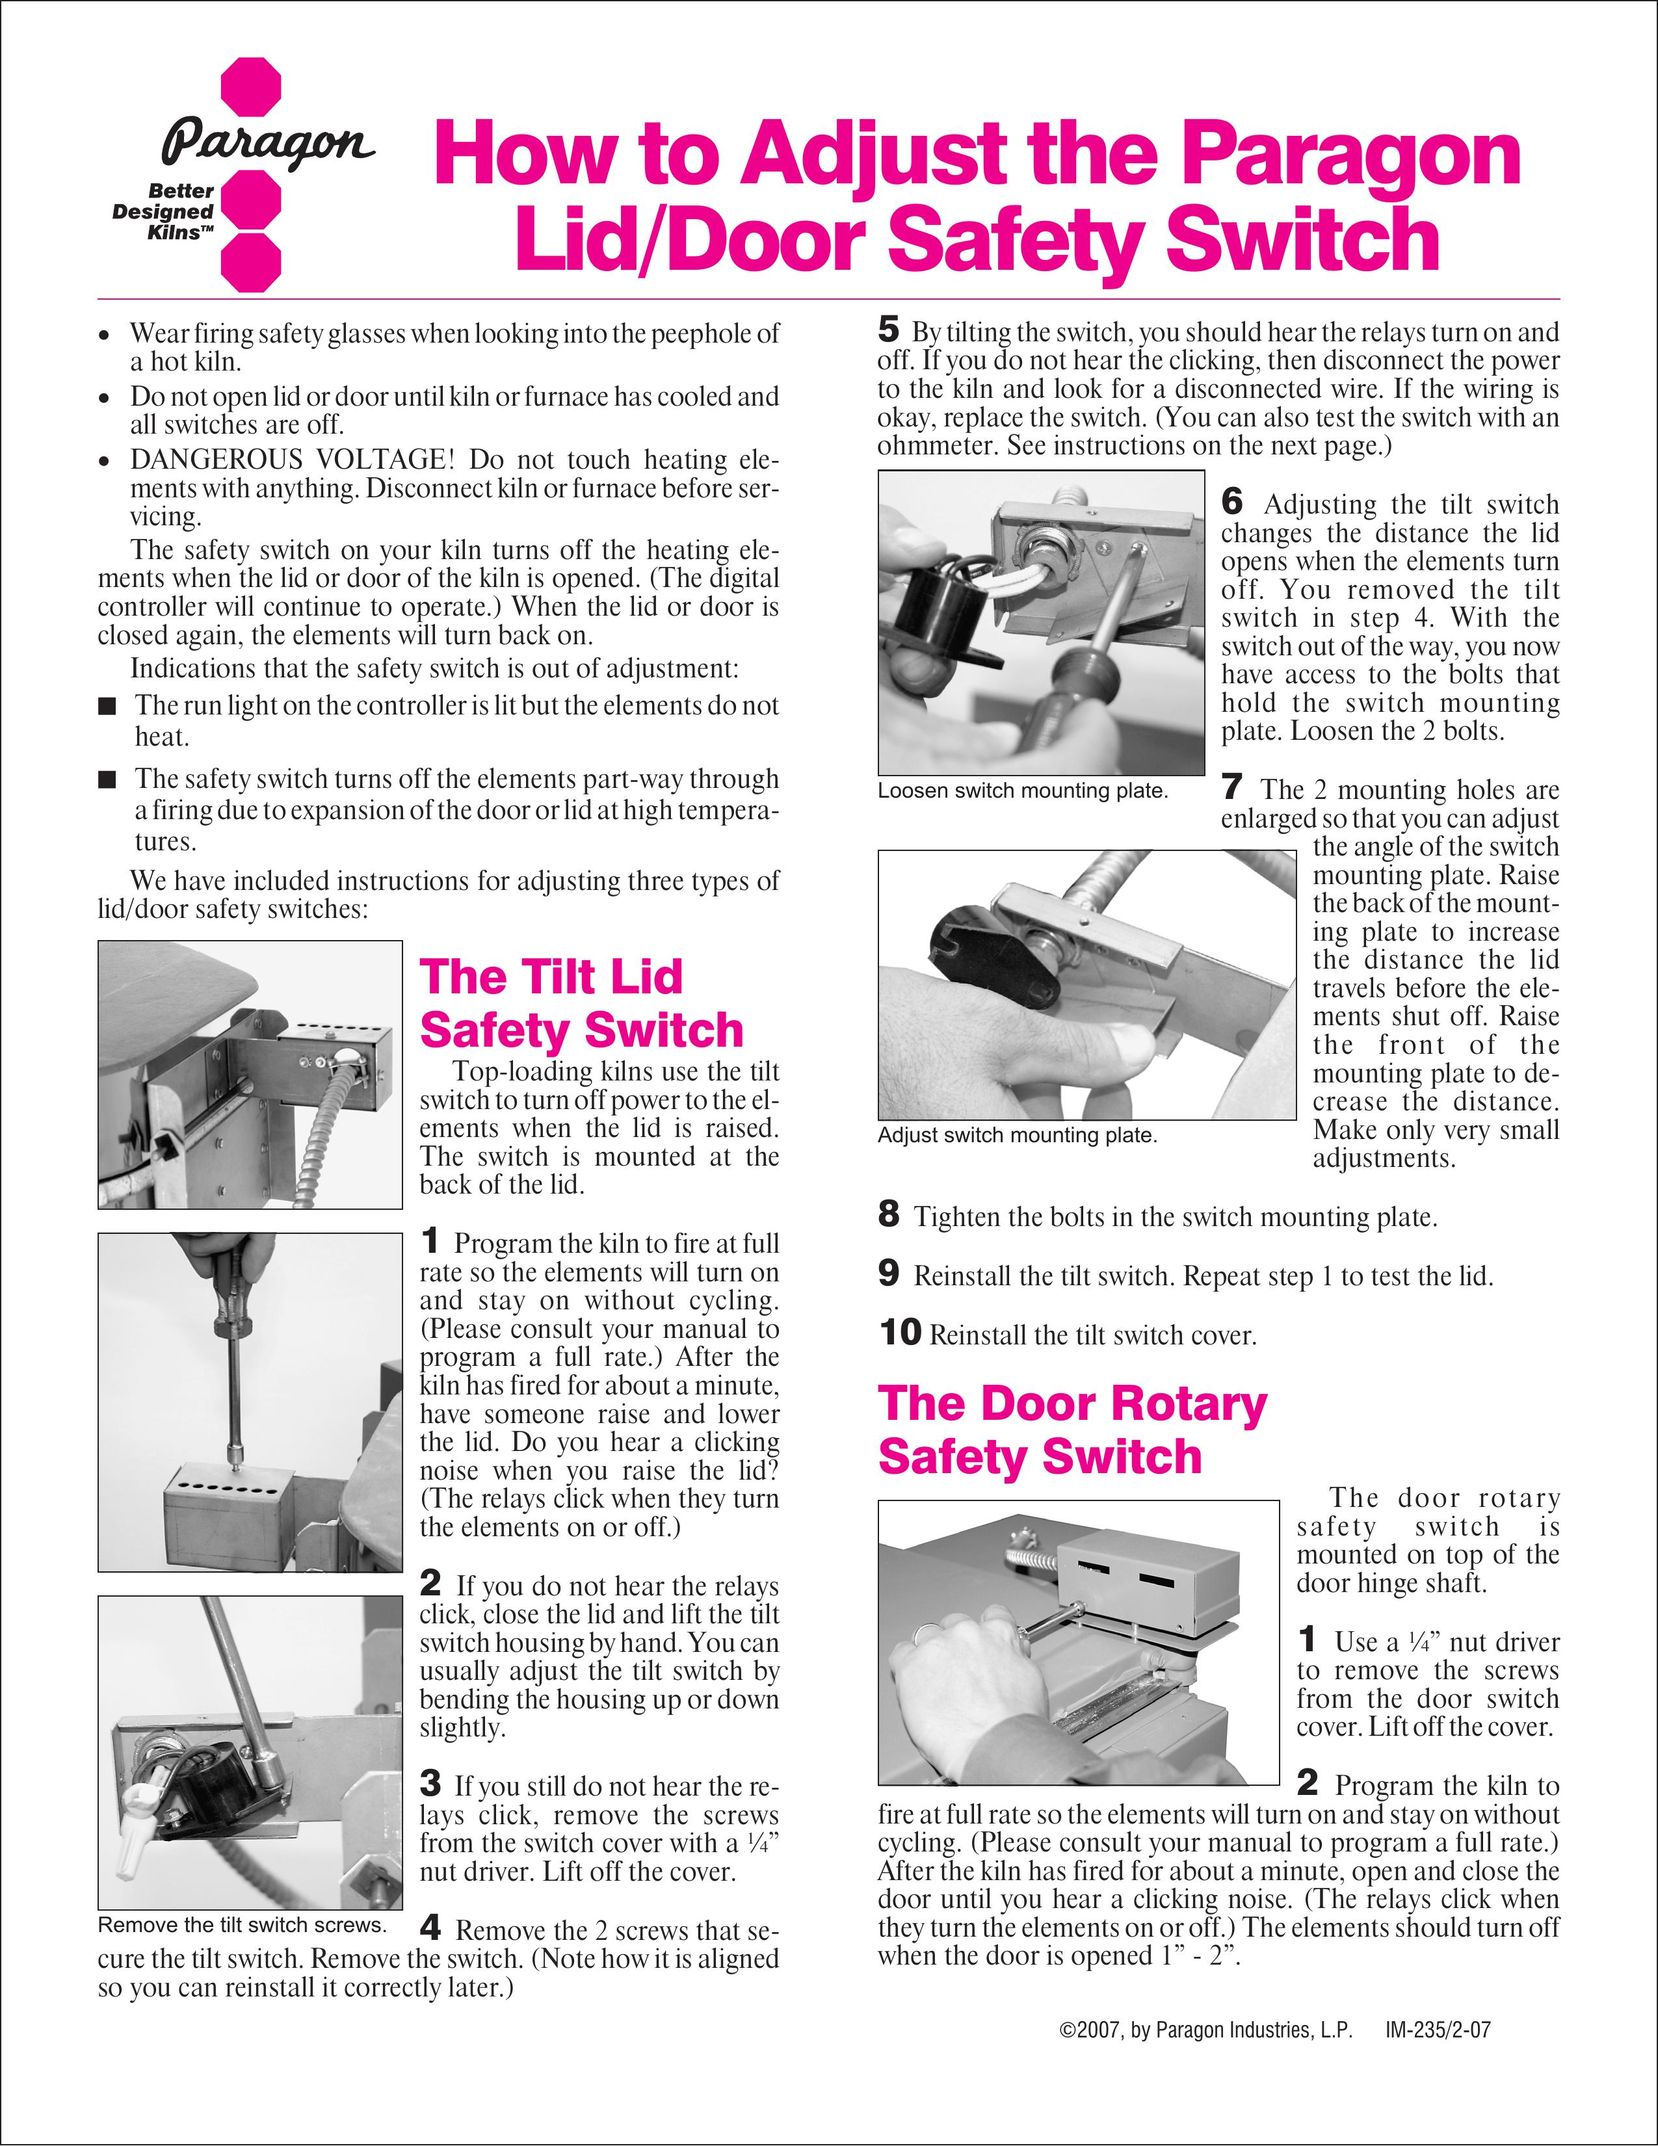 Paragon Lid/Door Safety Switch Switch User Manual